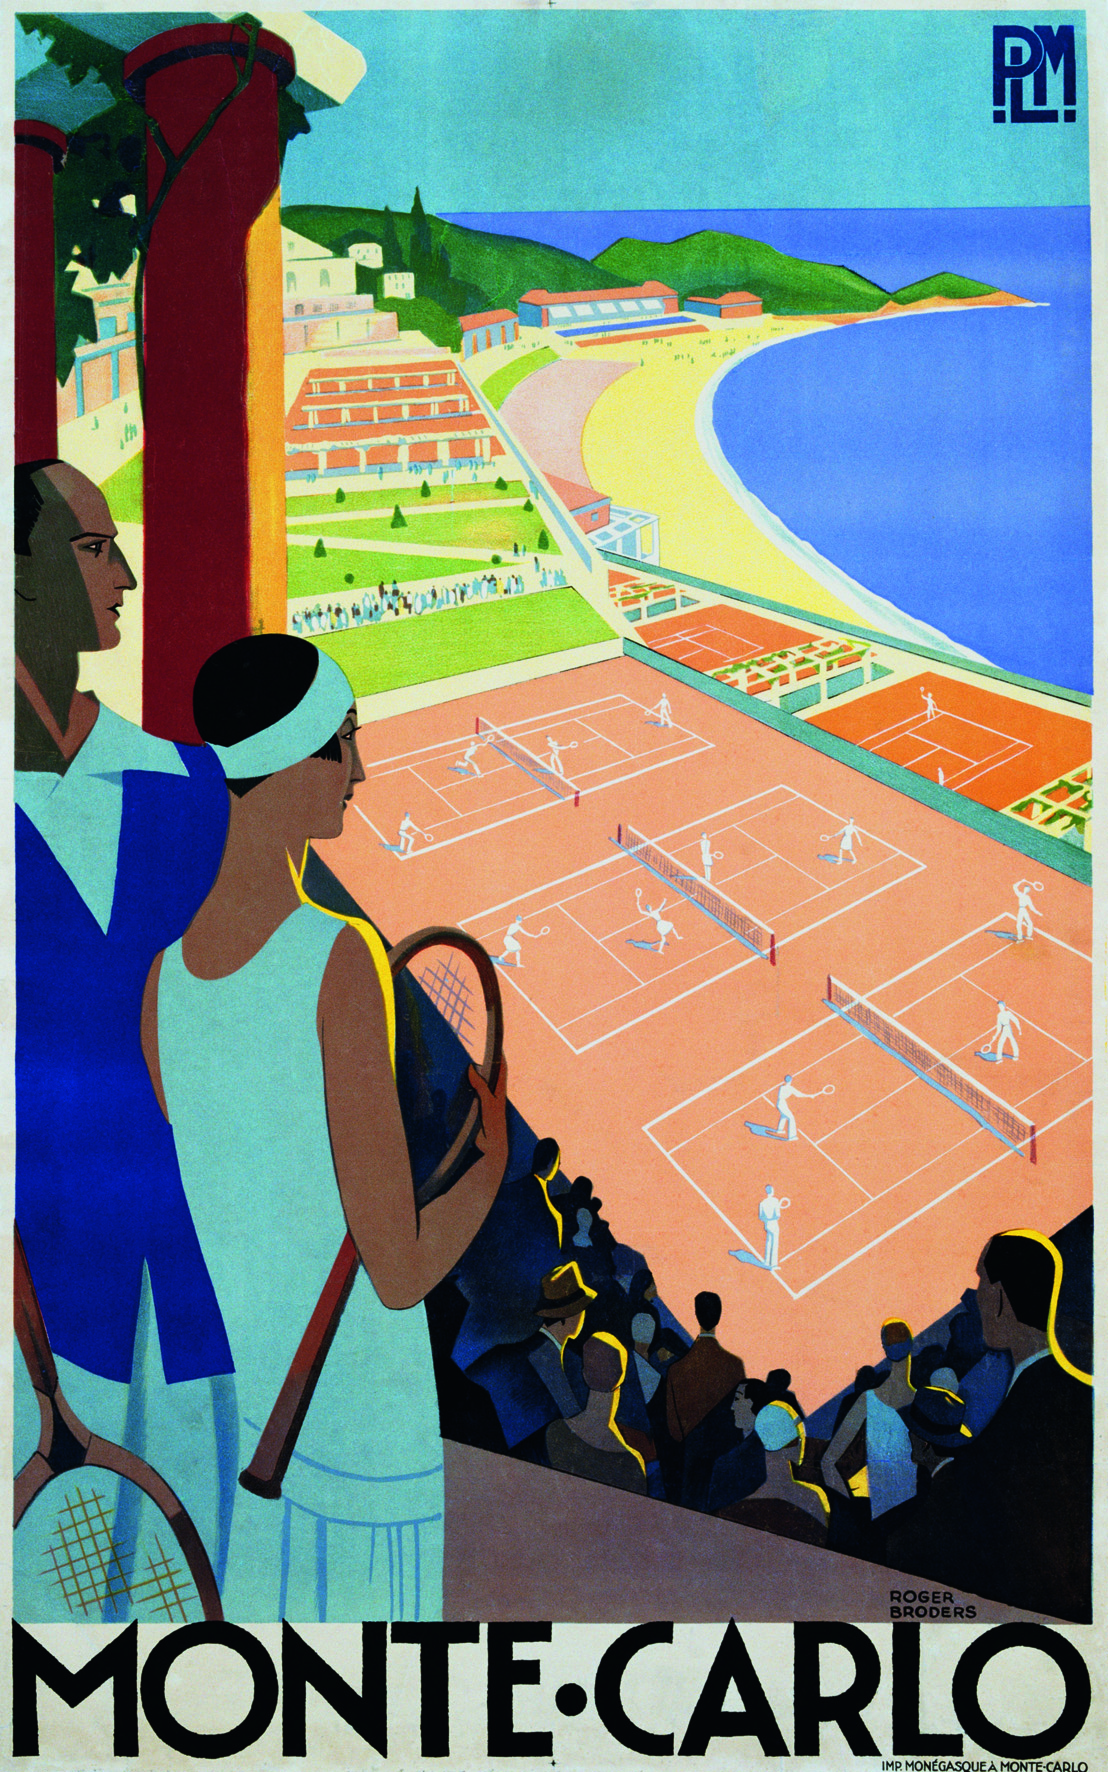   © The Stylish Life - Tennis, published by teNeues, www.teneues.com. Monte-Carlo Poster by Roger Broders, Photo © Swim Ink 2, LLC/CORBIS.  